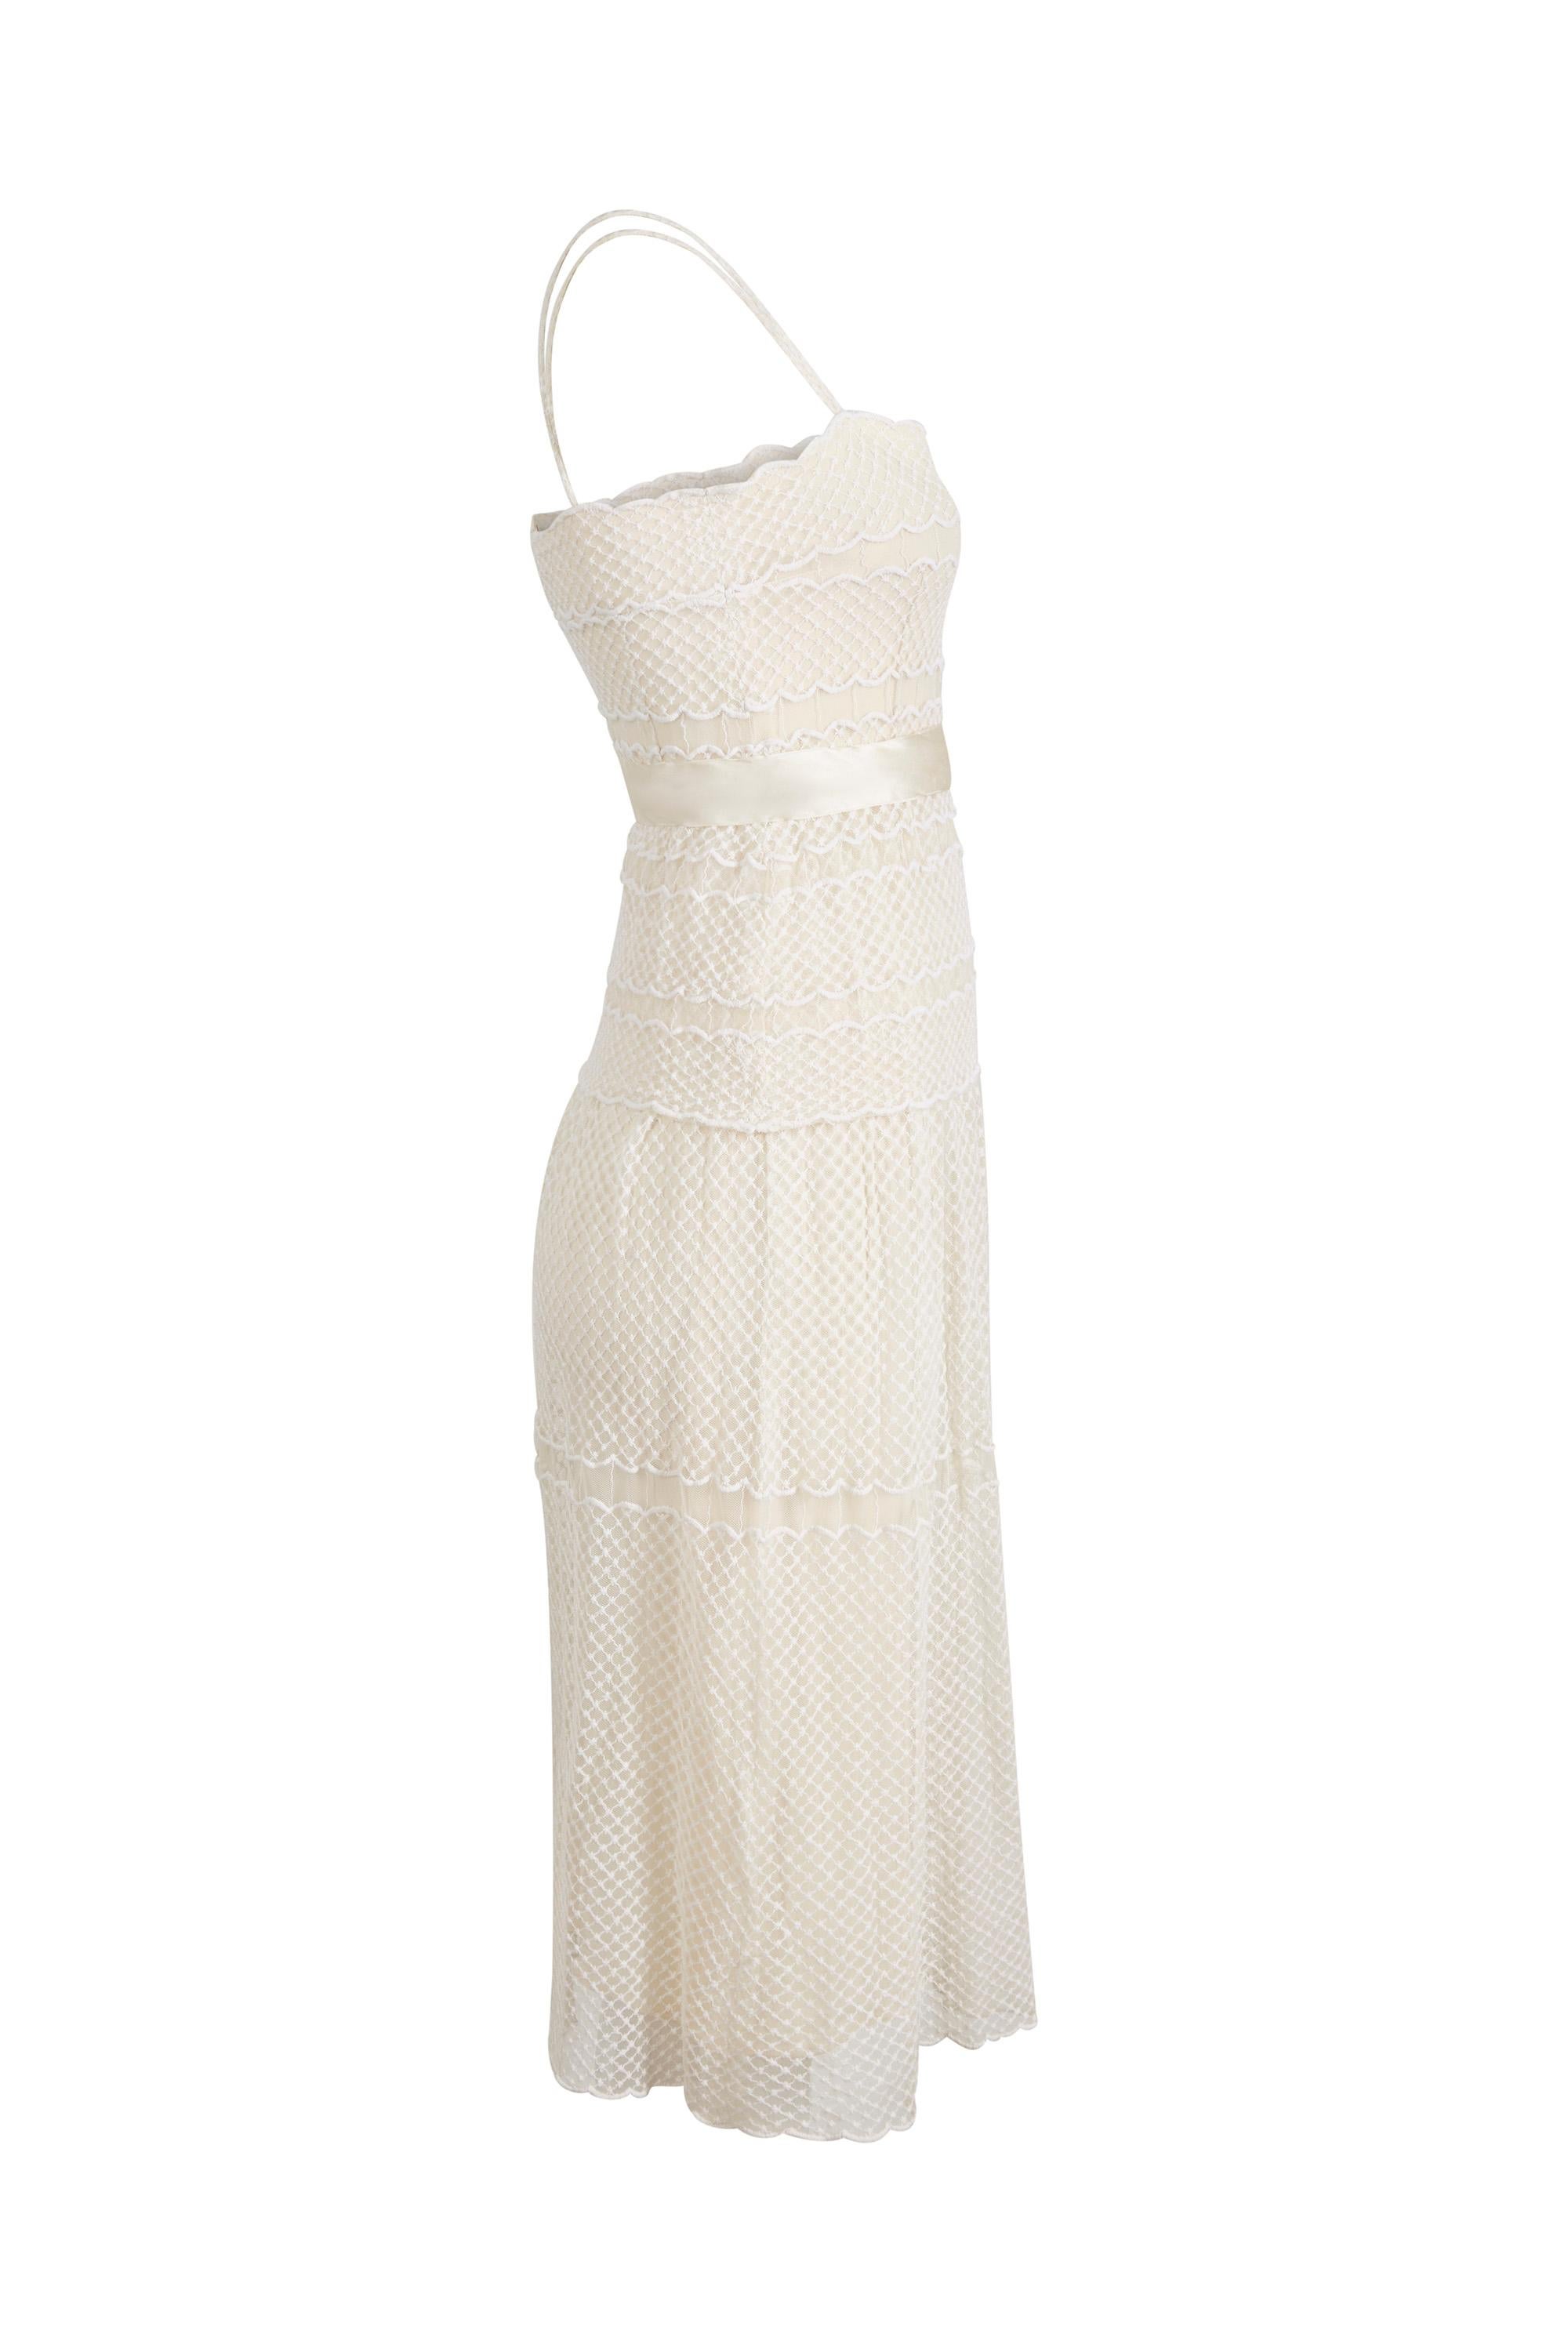 1970s Frank Usher Cream Lace Dress With Bolero In Excellent Condition For Sale In London, GB